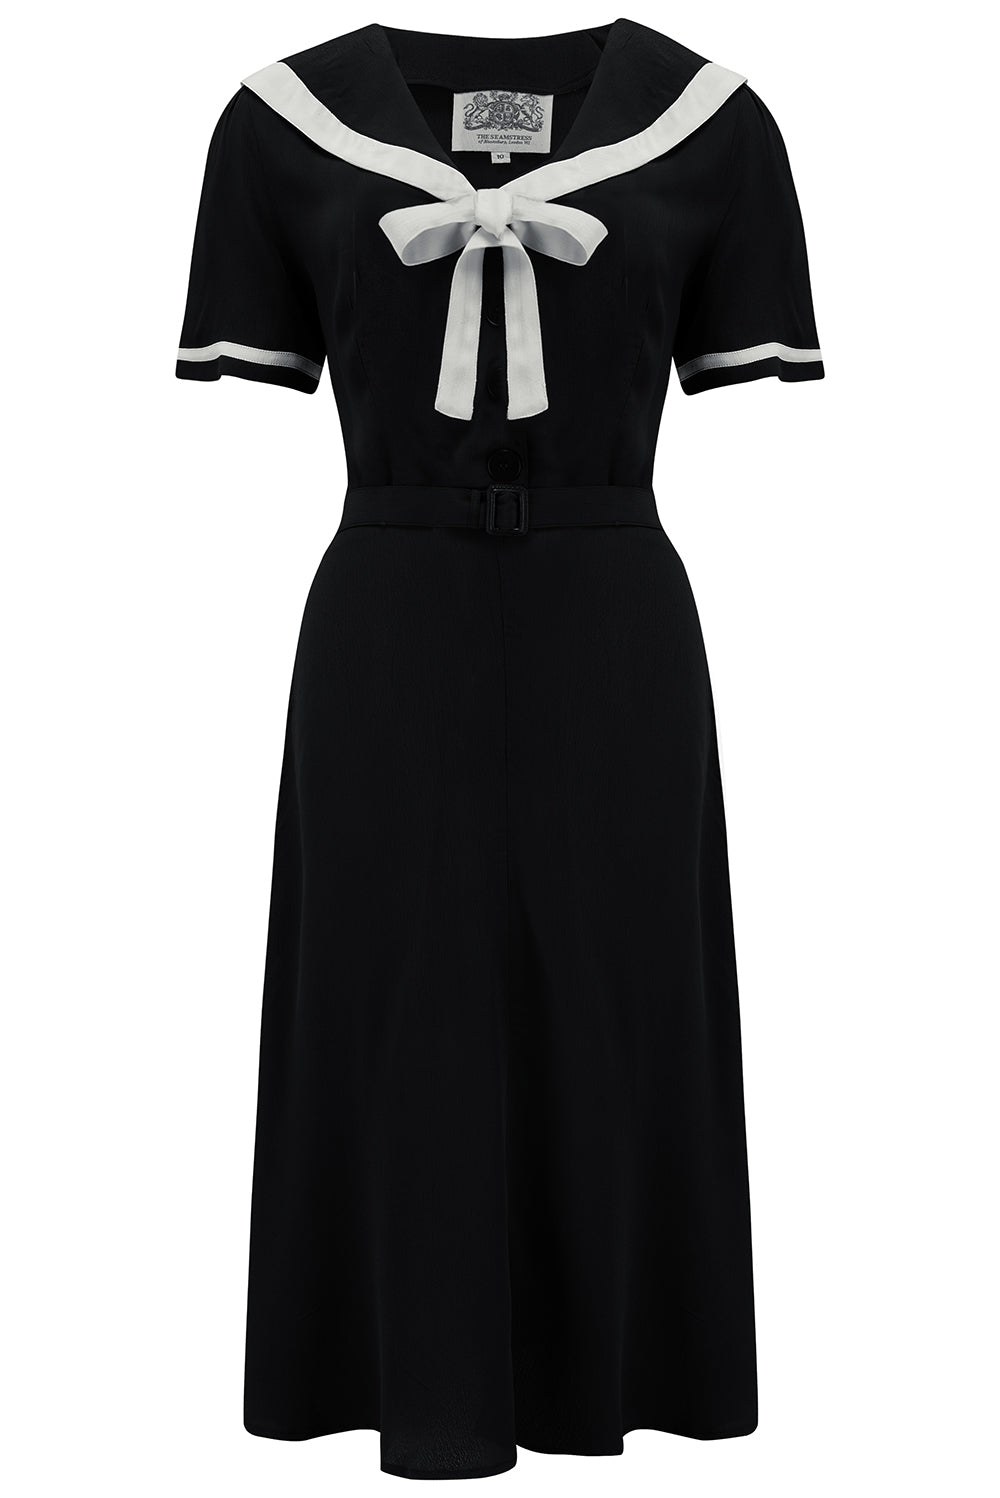 Patti Dress In 1940s Solid Black With Contrast Collar, Authentic true vintage style - True and authentic vintage style clothing, inspired by the Classic styles of CC41 , WW2 and the fun 1950s RocknRoll era, for everyday wear plus events like Goodwood Revival, Twinwood Festival and Viva Las Vegas Rockabilly Weekend Rock n Romance The Seamstress Of Bloomsbury